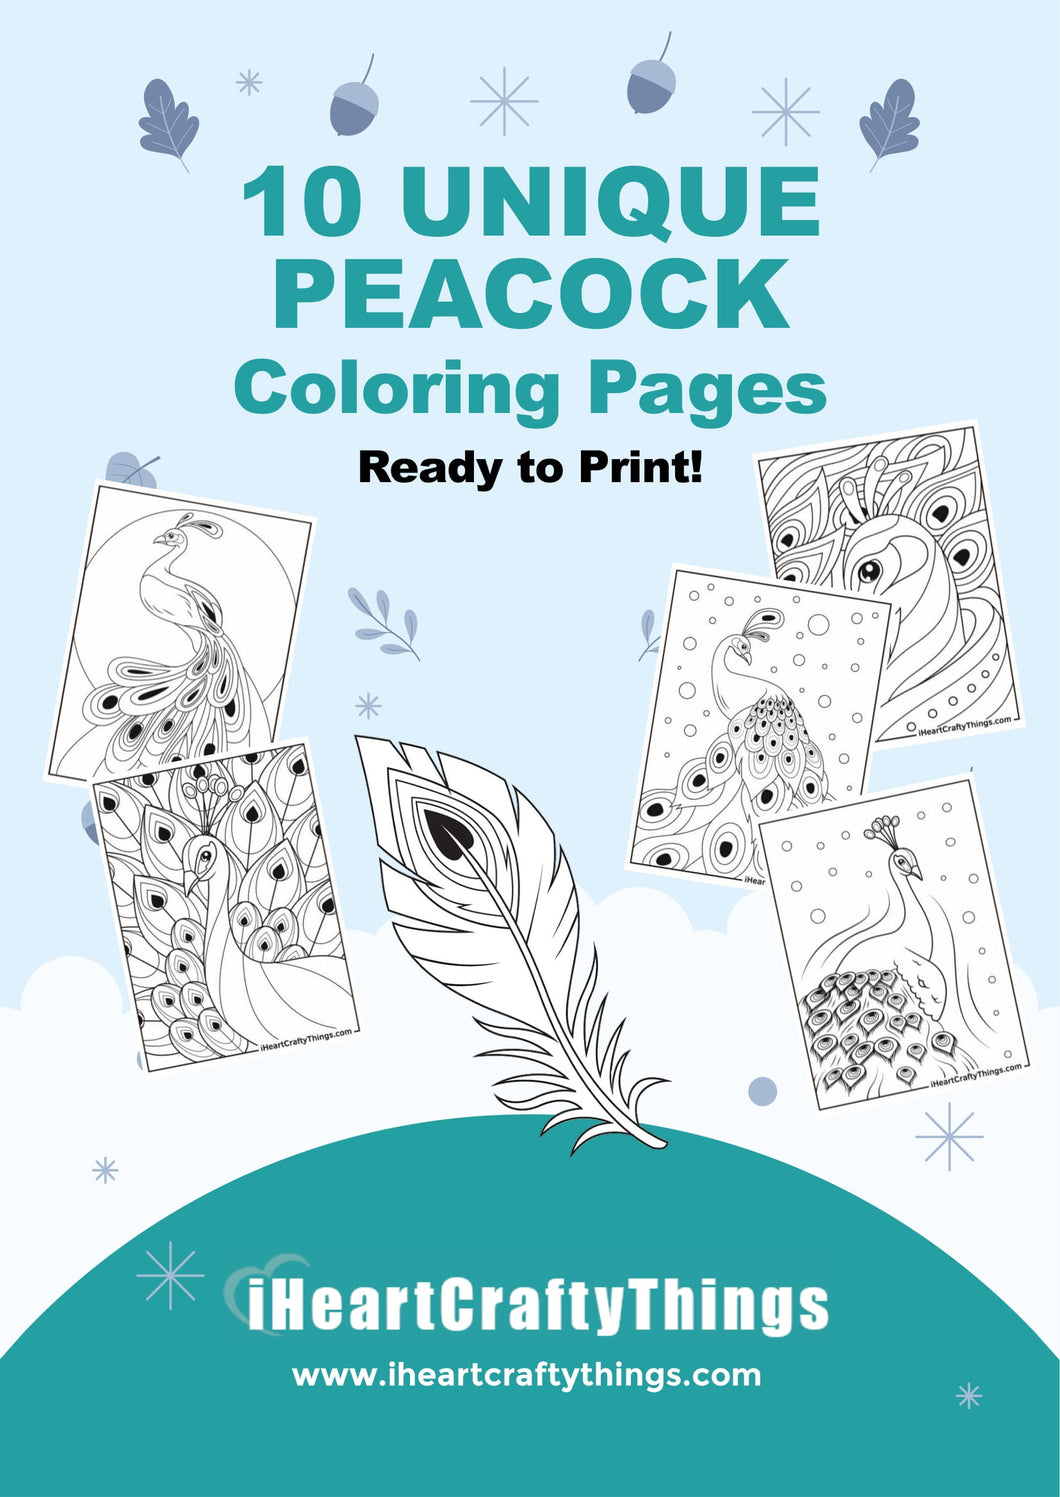 10 PEACOCK COLORING PAGES